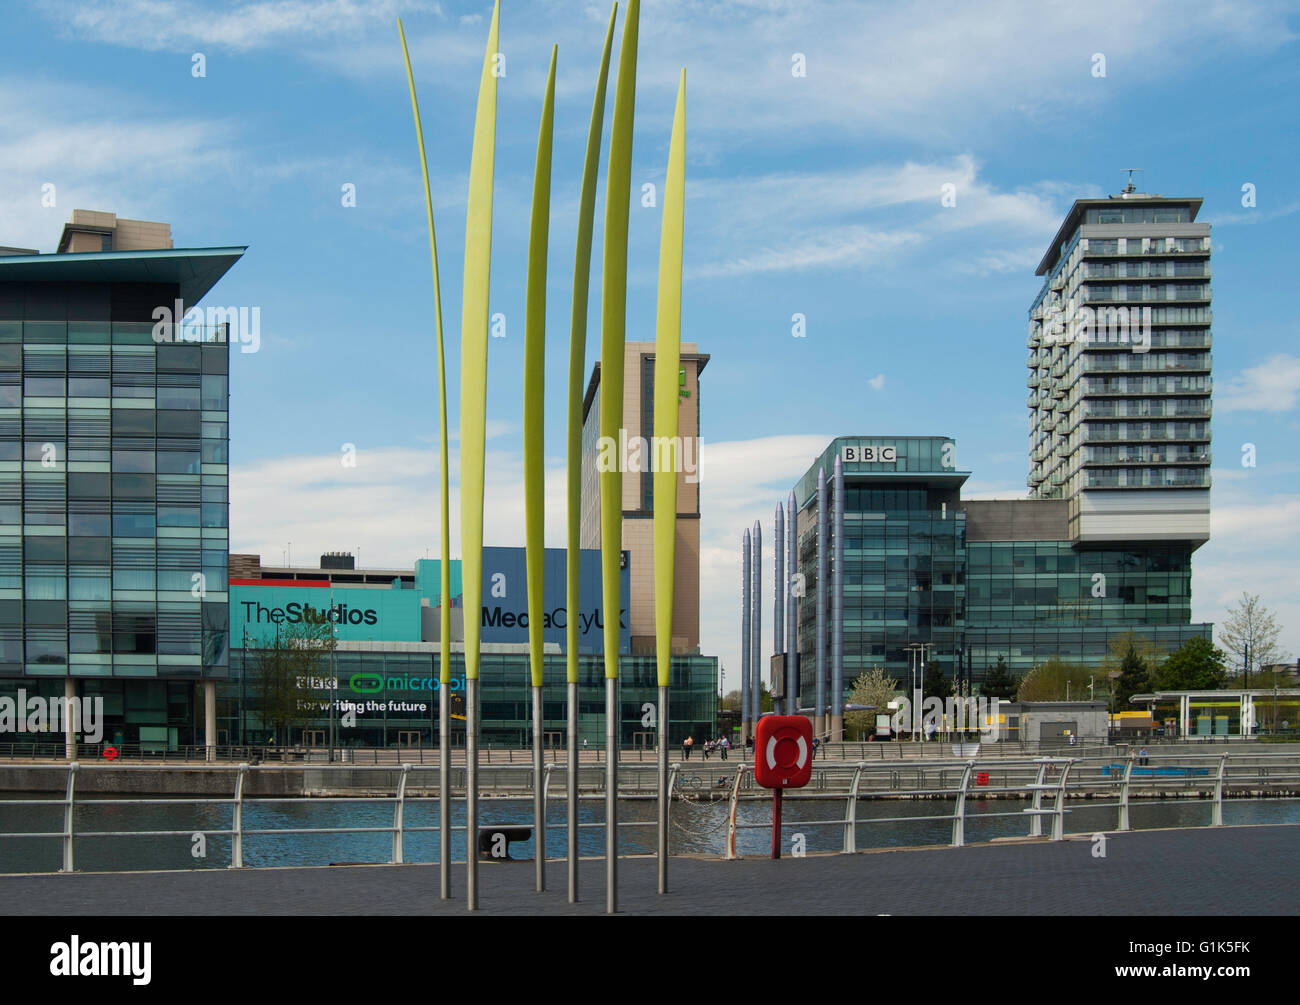 Salford Quays - Media City - featuring the 'Where the Wild Things Were' Sculpture by Unusual Stock Photo